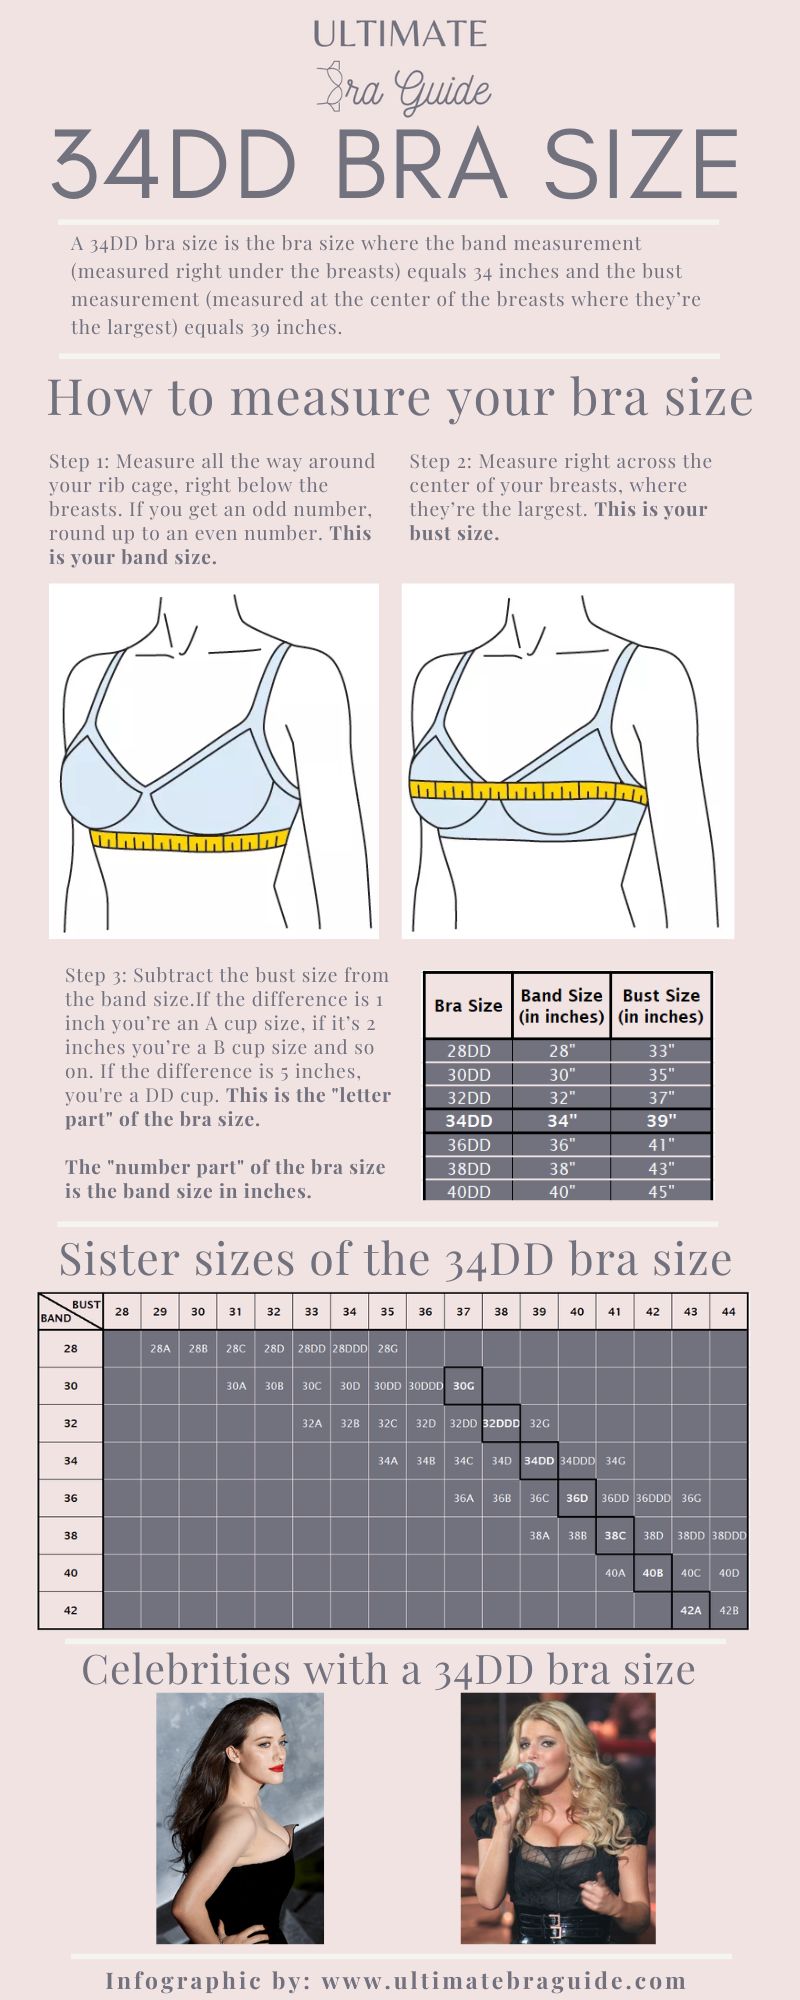 An infographic all about the 34DD bra size - what it is, how to measure if you're 34DD bra size, 34DD bra sister sizes, 34DD cup examples, and so on